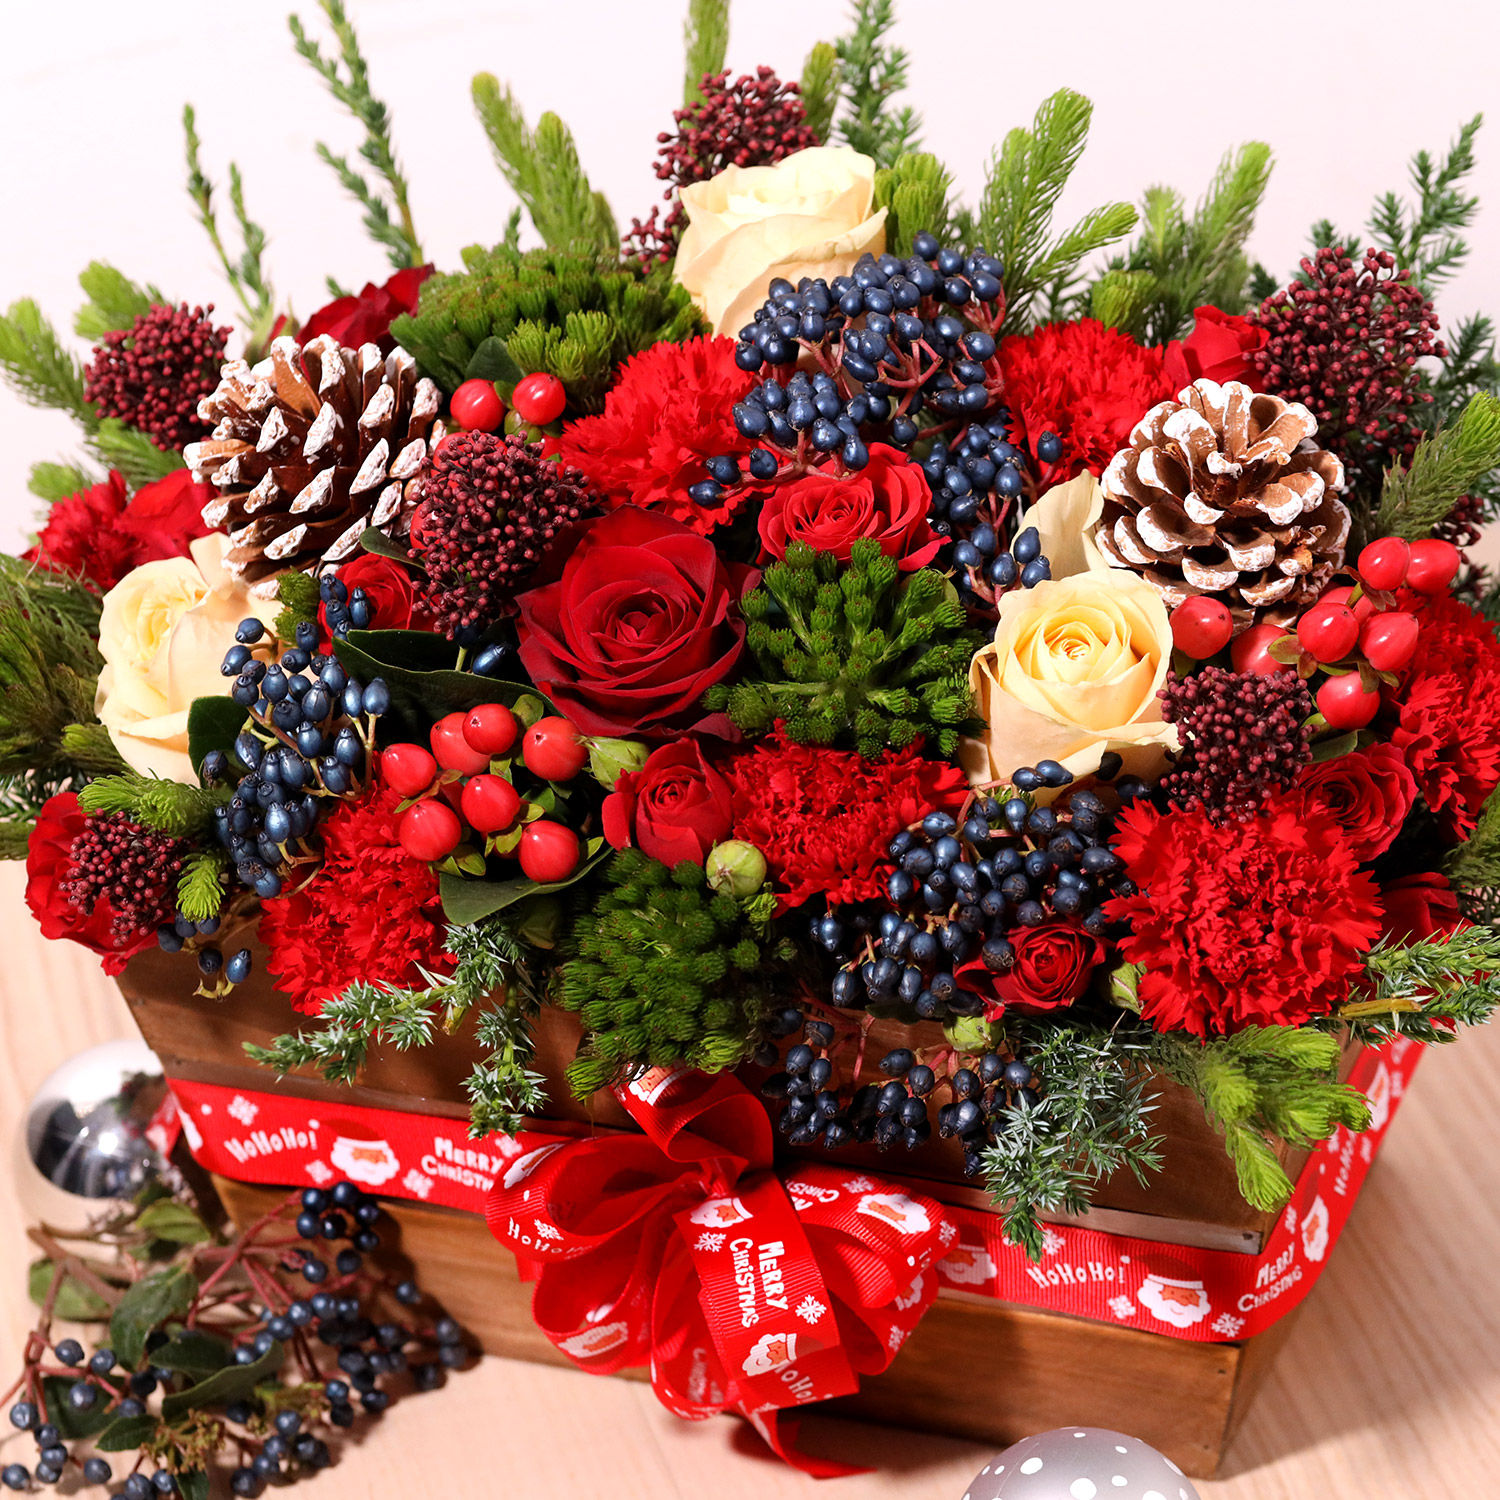 Online Christmas Special Flower Arrangement Gift Delivery in Singapore ...